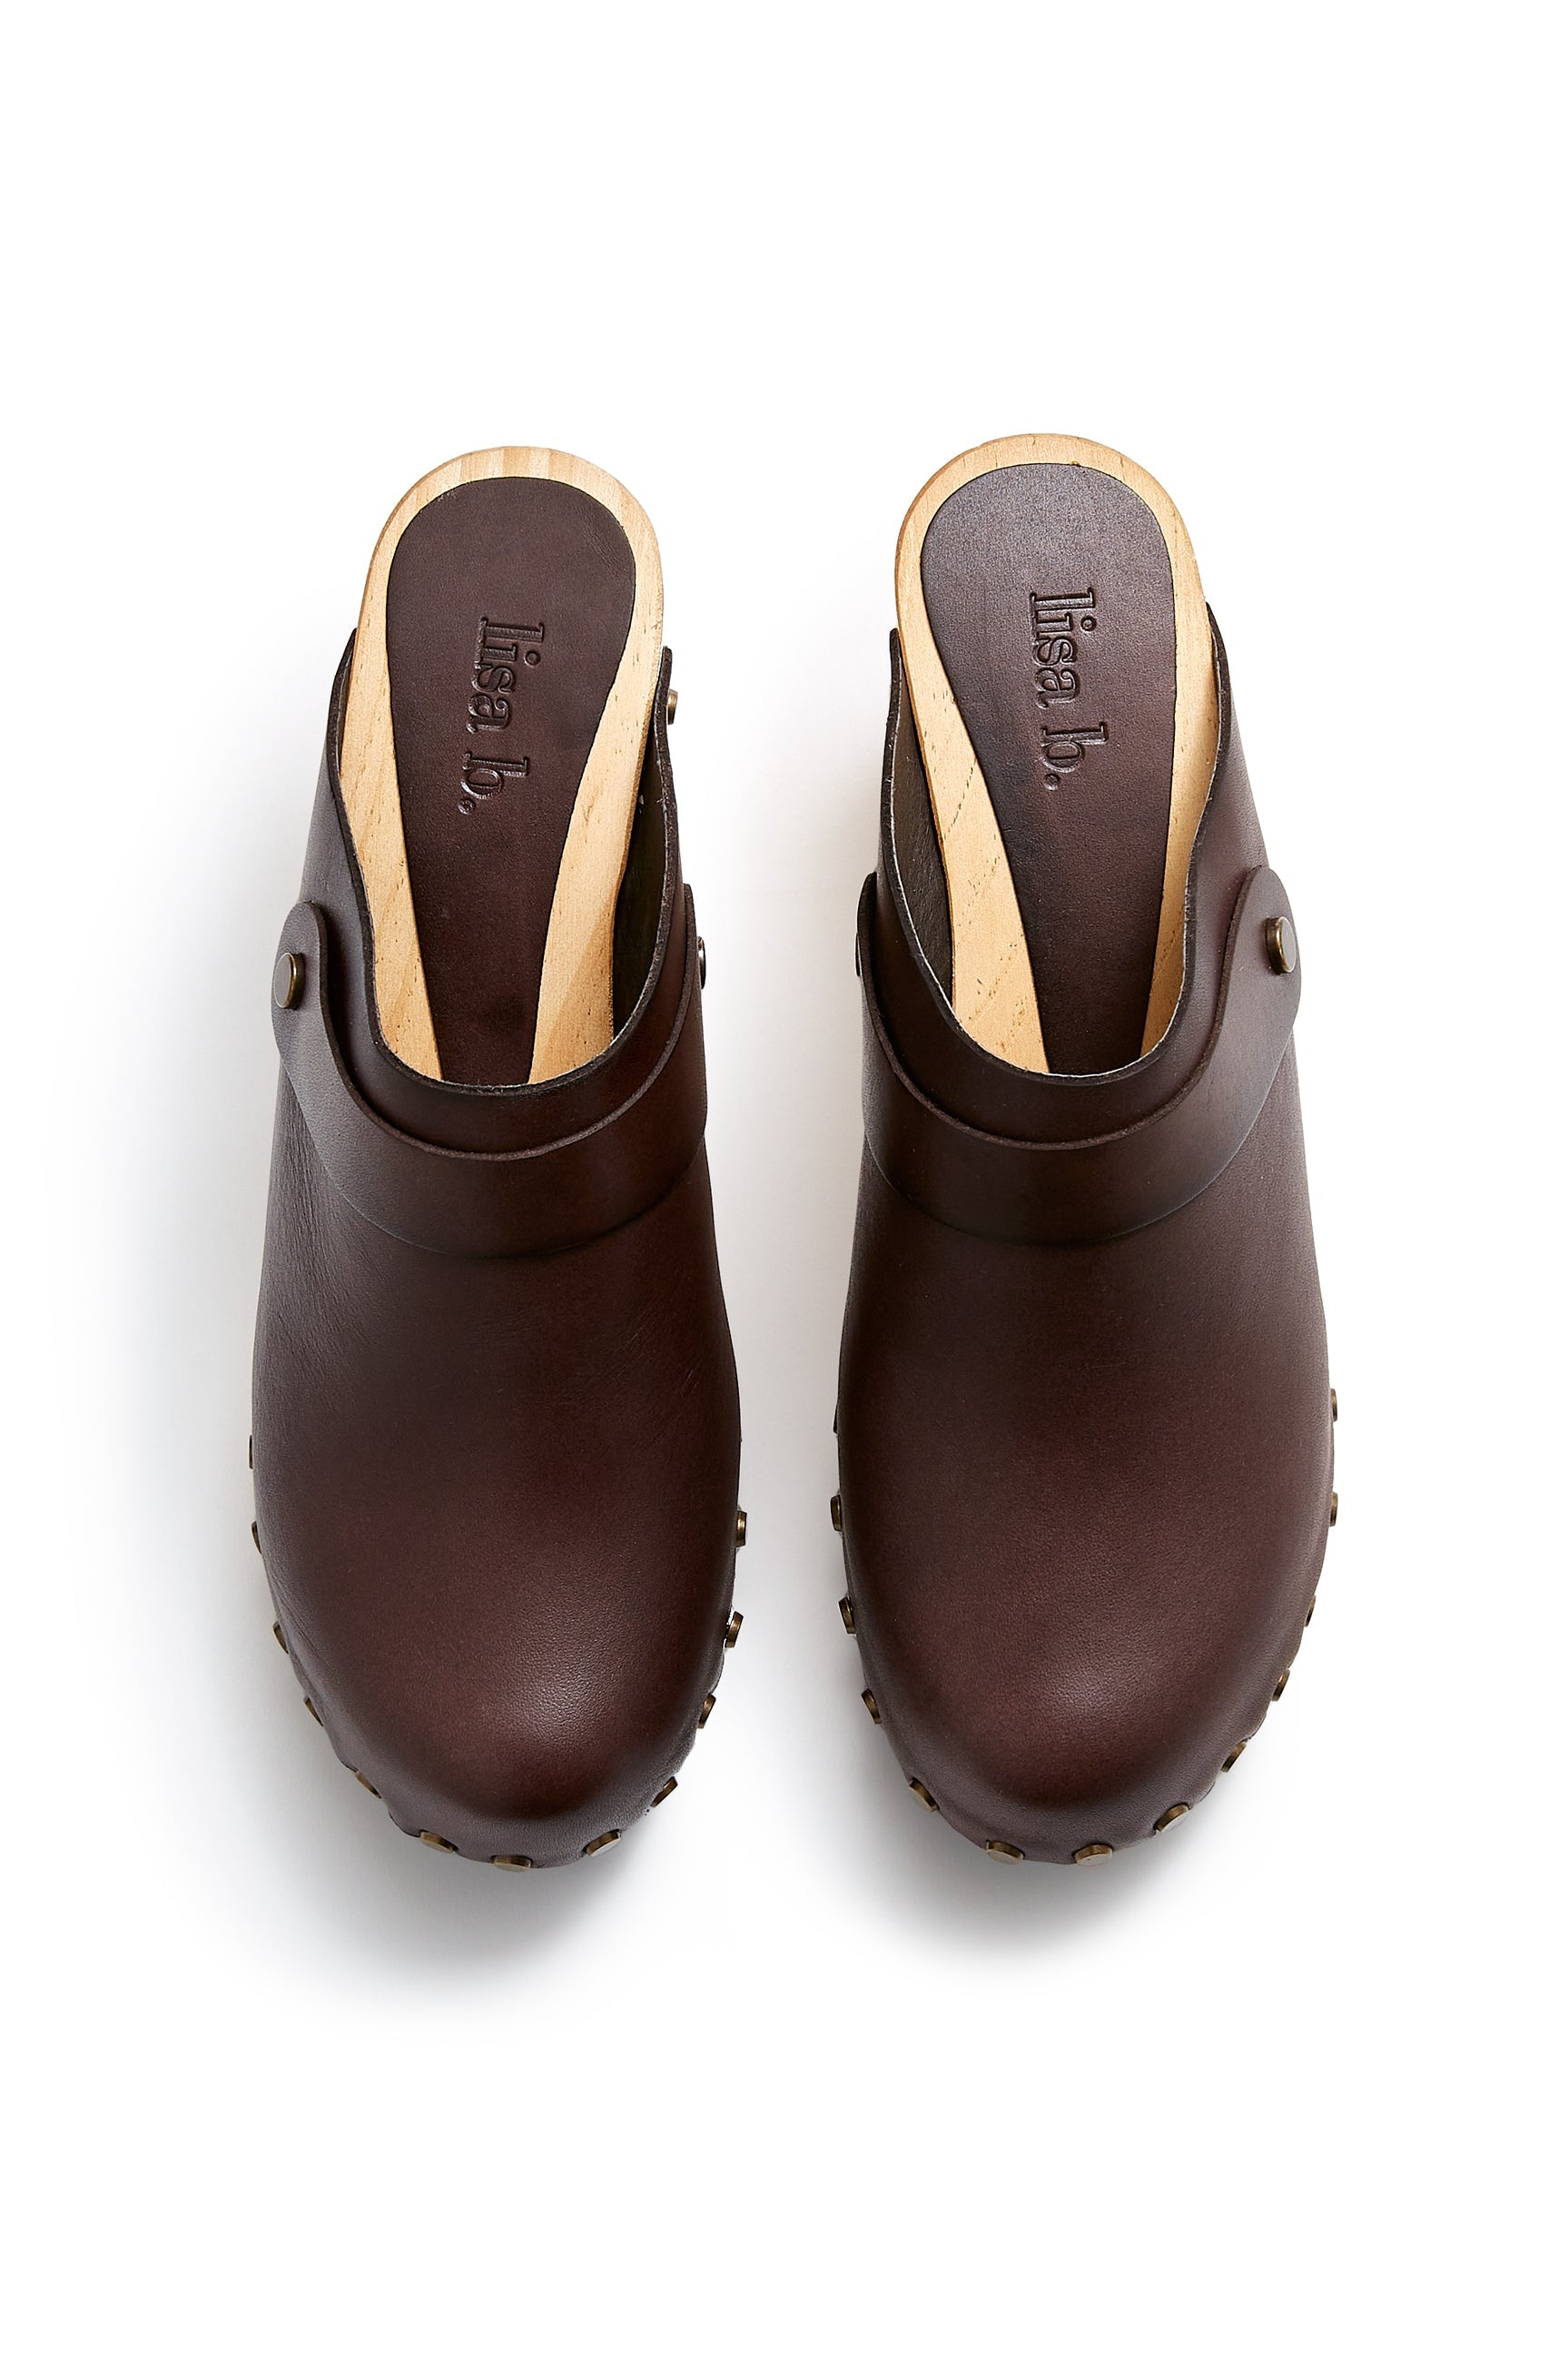 high heel classic clogs in dark brown - ships end of April Clogs lisa b. 